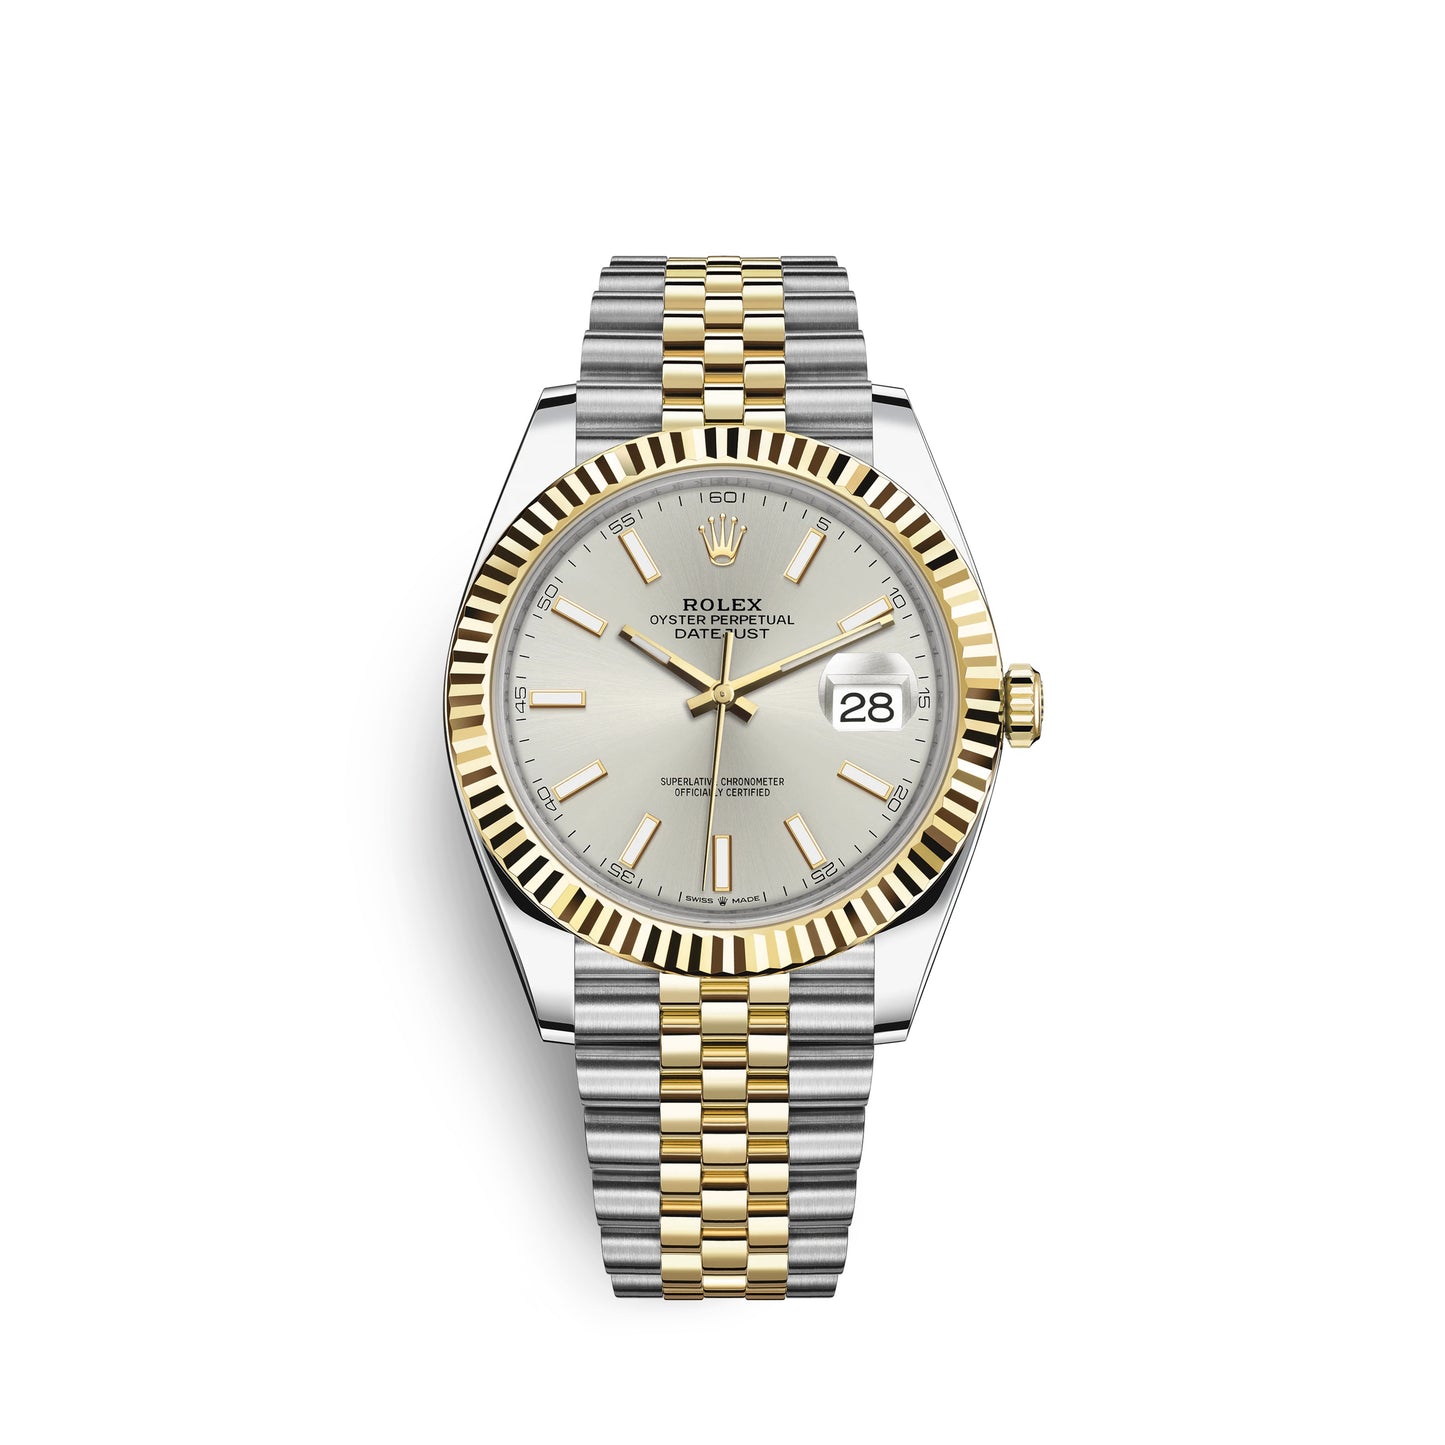 Rolex Datejust 41, 18k Yellow Gold and Stainless Steel, 41mm, Ref# 126333-0002